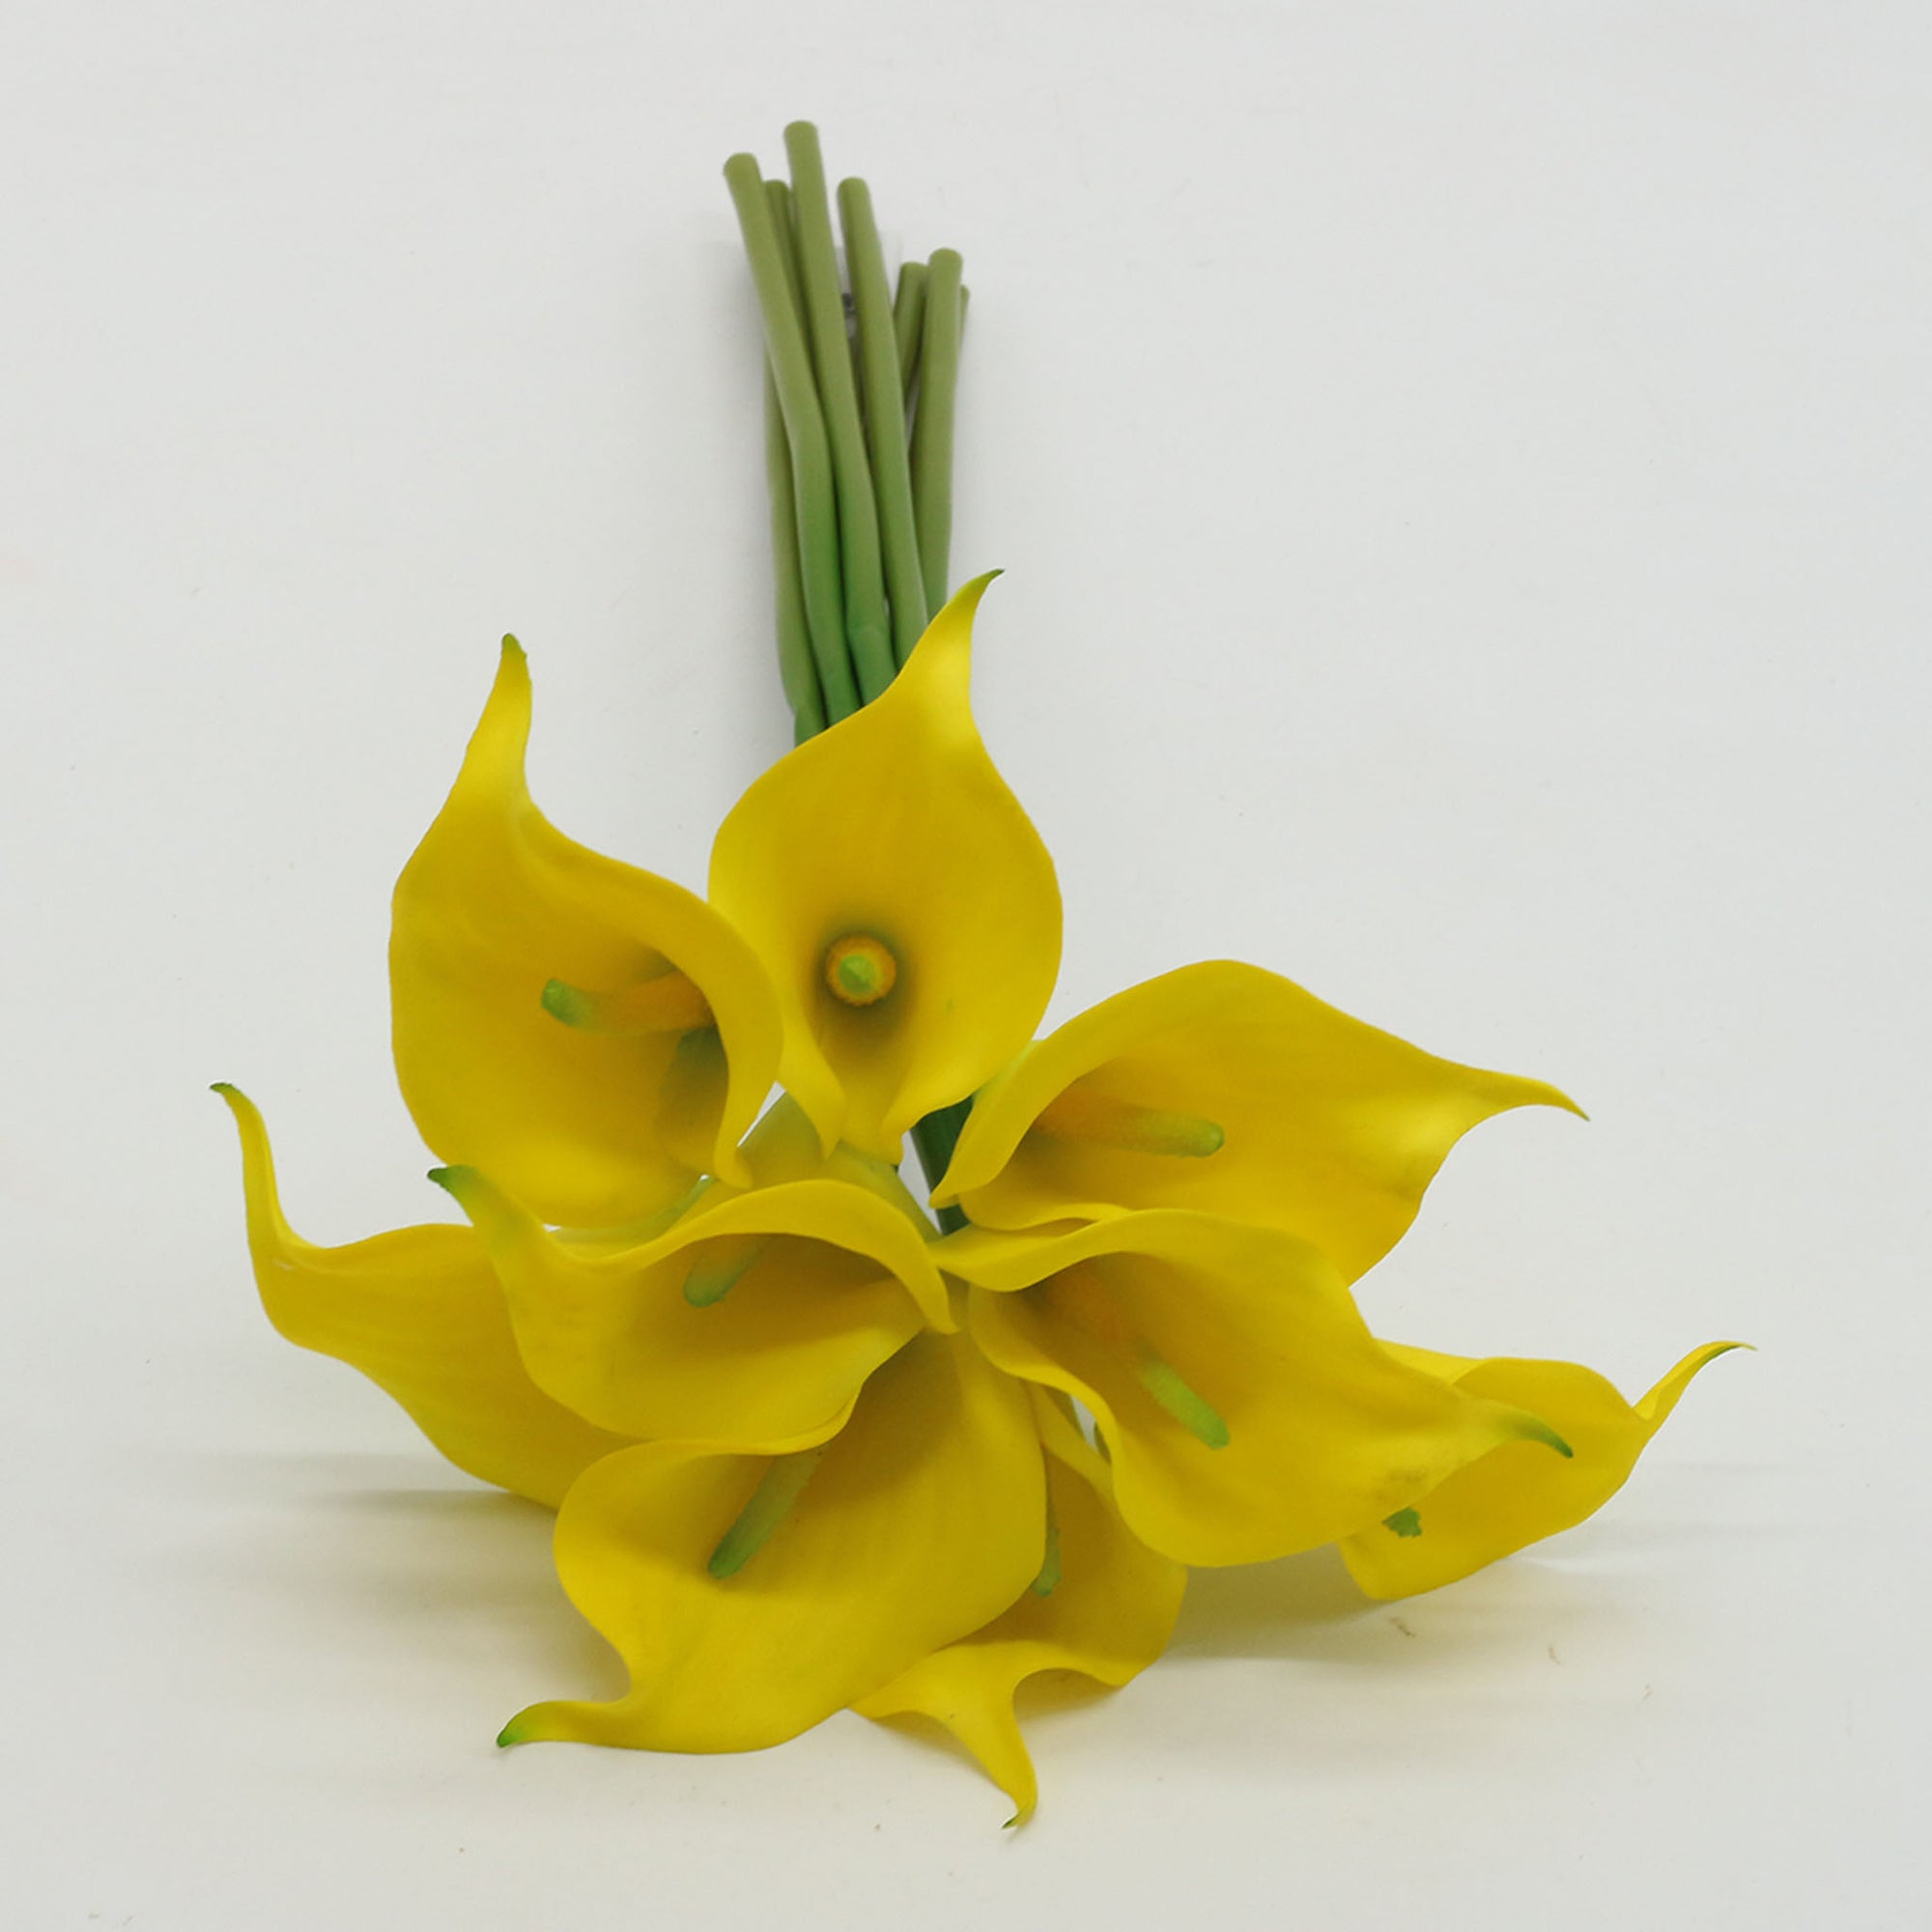 Lime Yellow Calla Lily Bouquet Yellow Calla Lilies Wedding Flowers